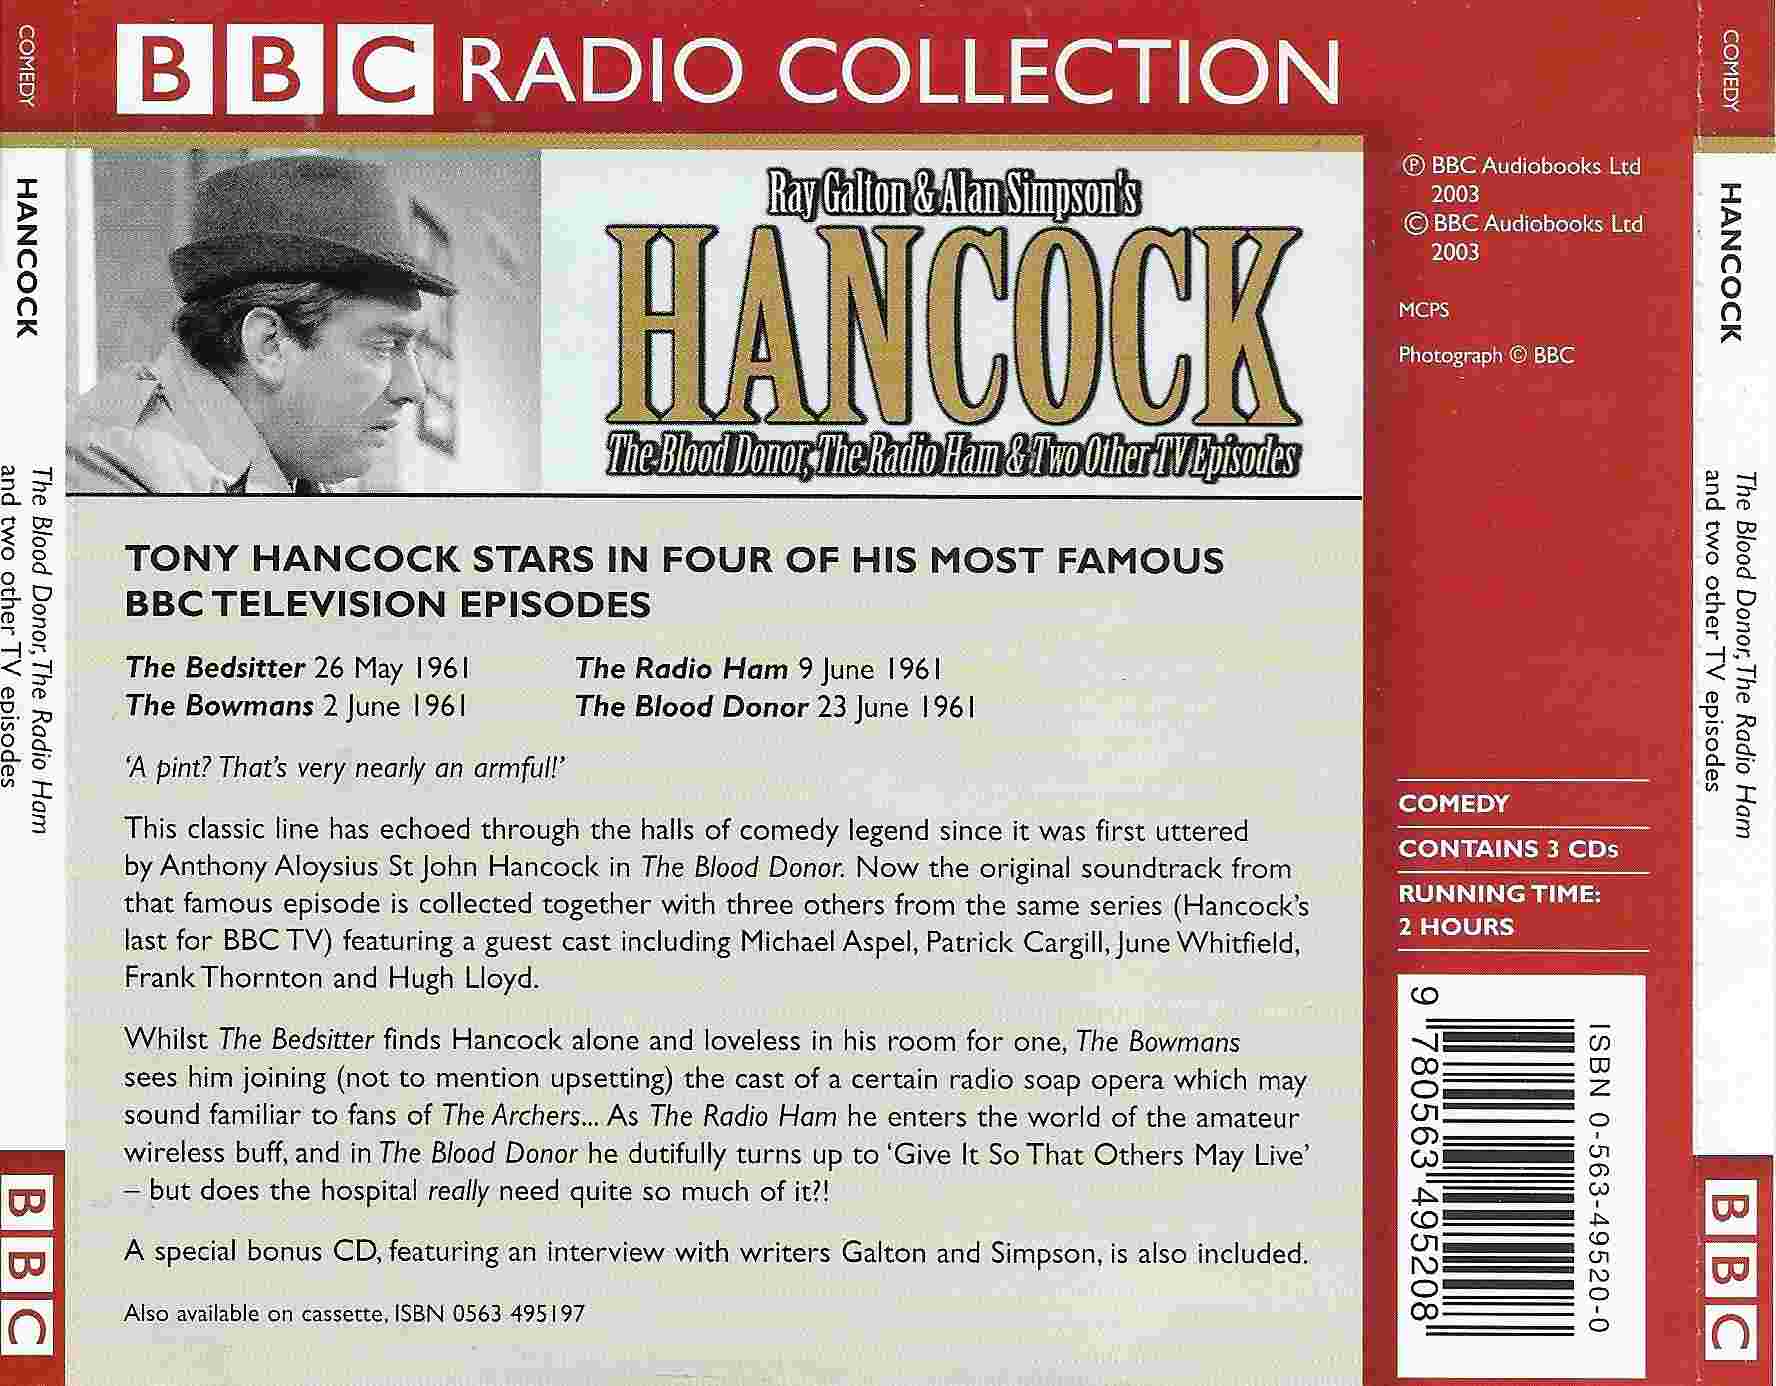 Picture of ISBN 0-563-49520-0 Hancock by artist Ray Galton / Alan Simpson from the BBC records and Tapes library